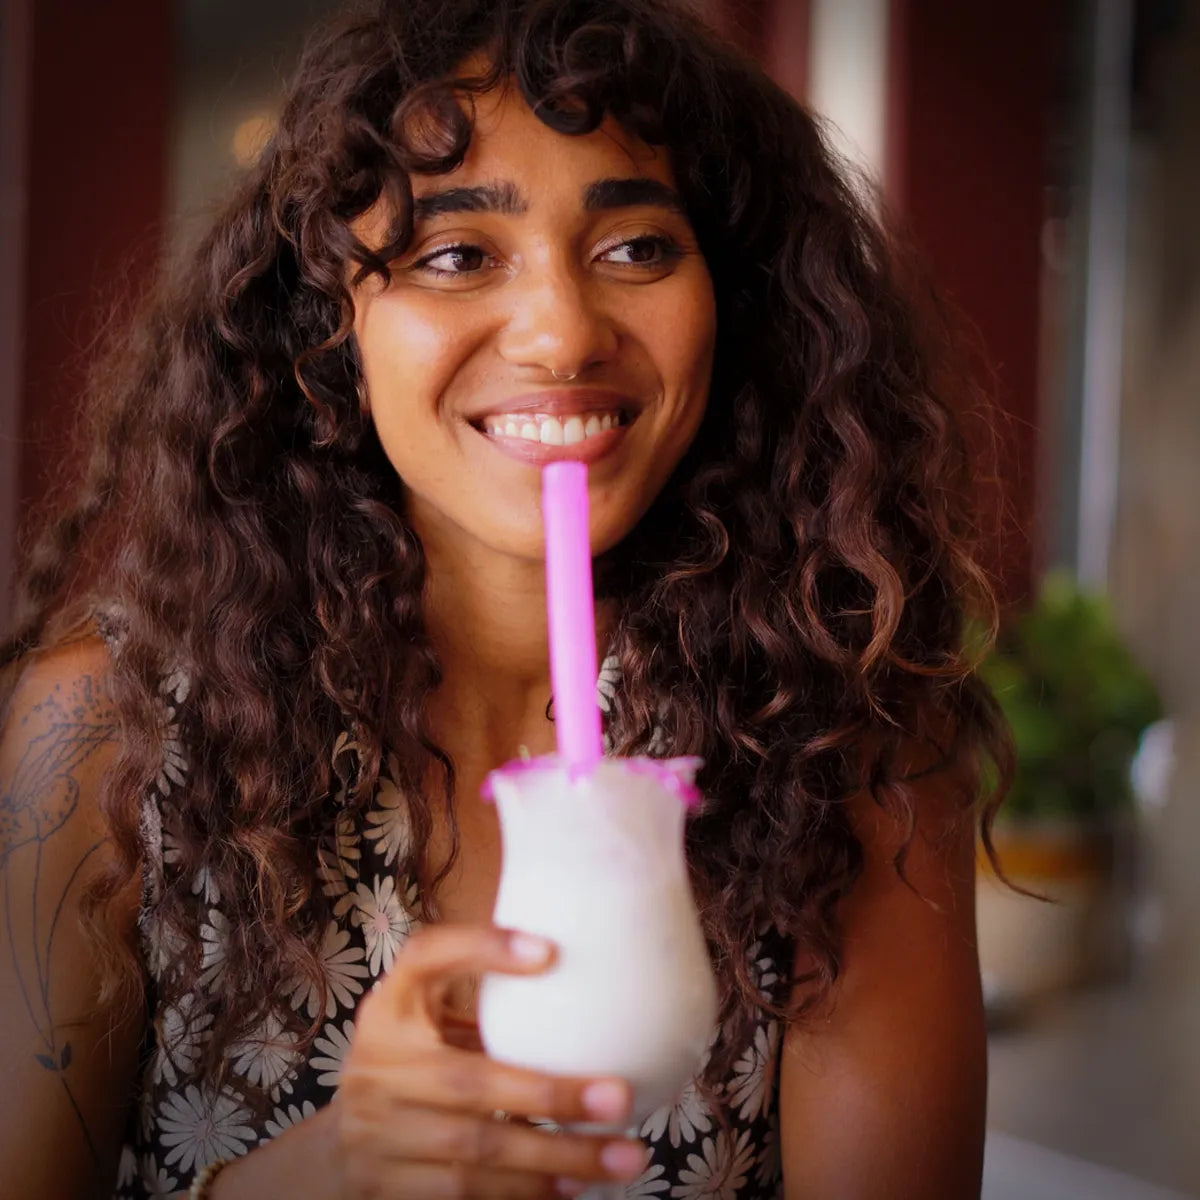 Woman drinking out of a glass using a pink straw.